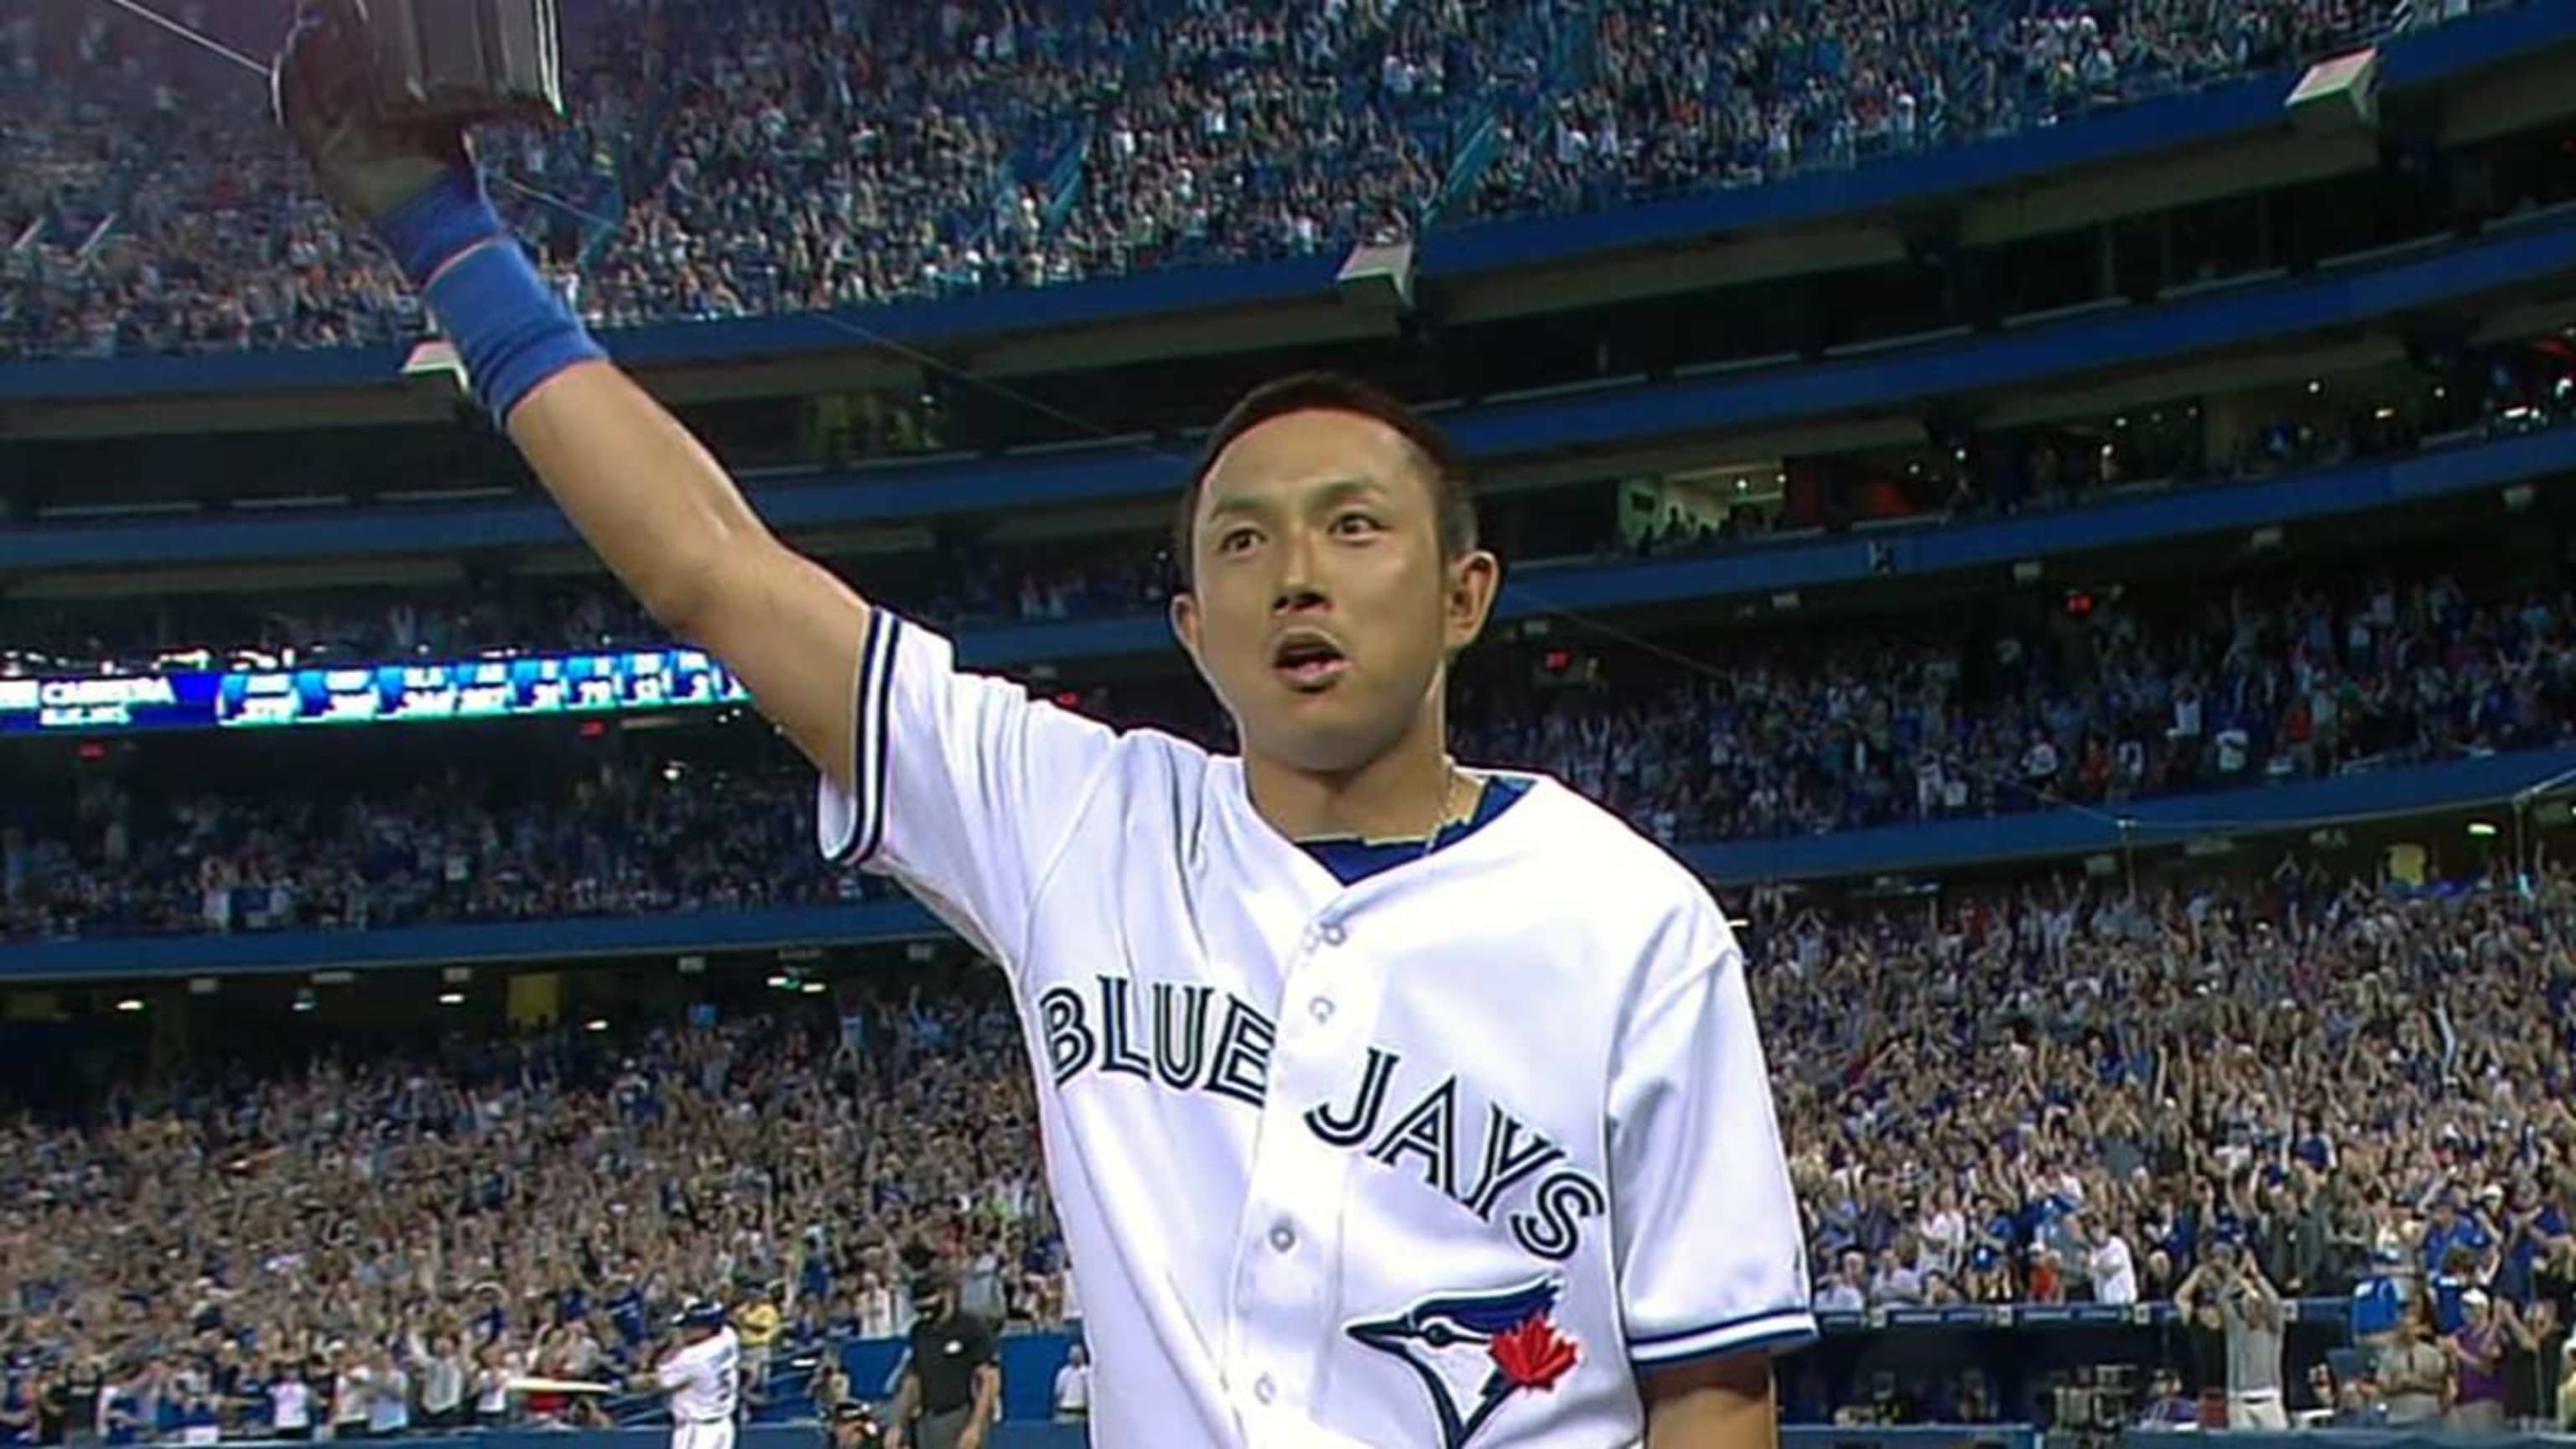 On This Day: 10 years ago today, the Blue Jays signed Munenori Kawasaki